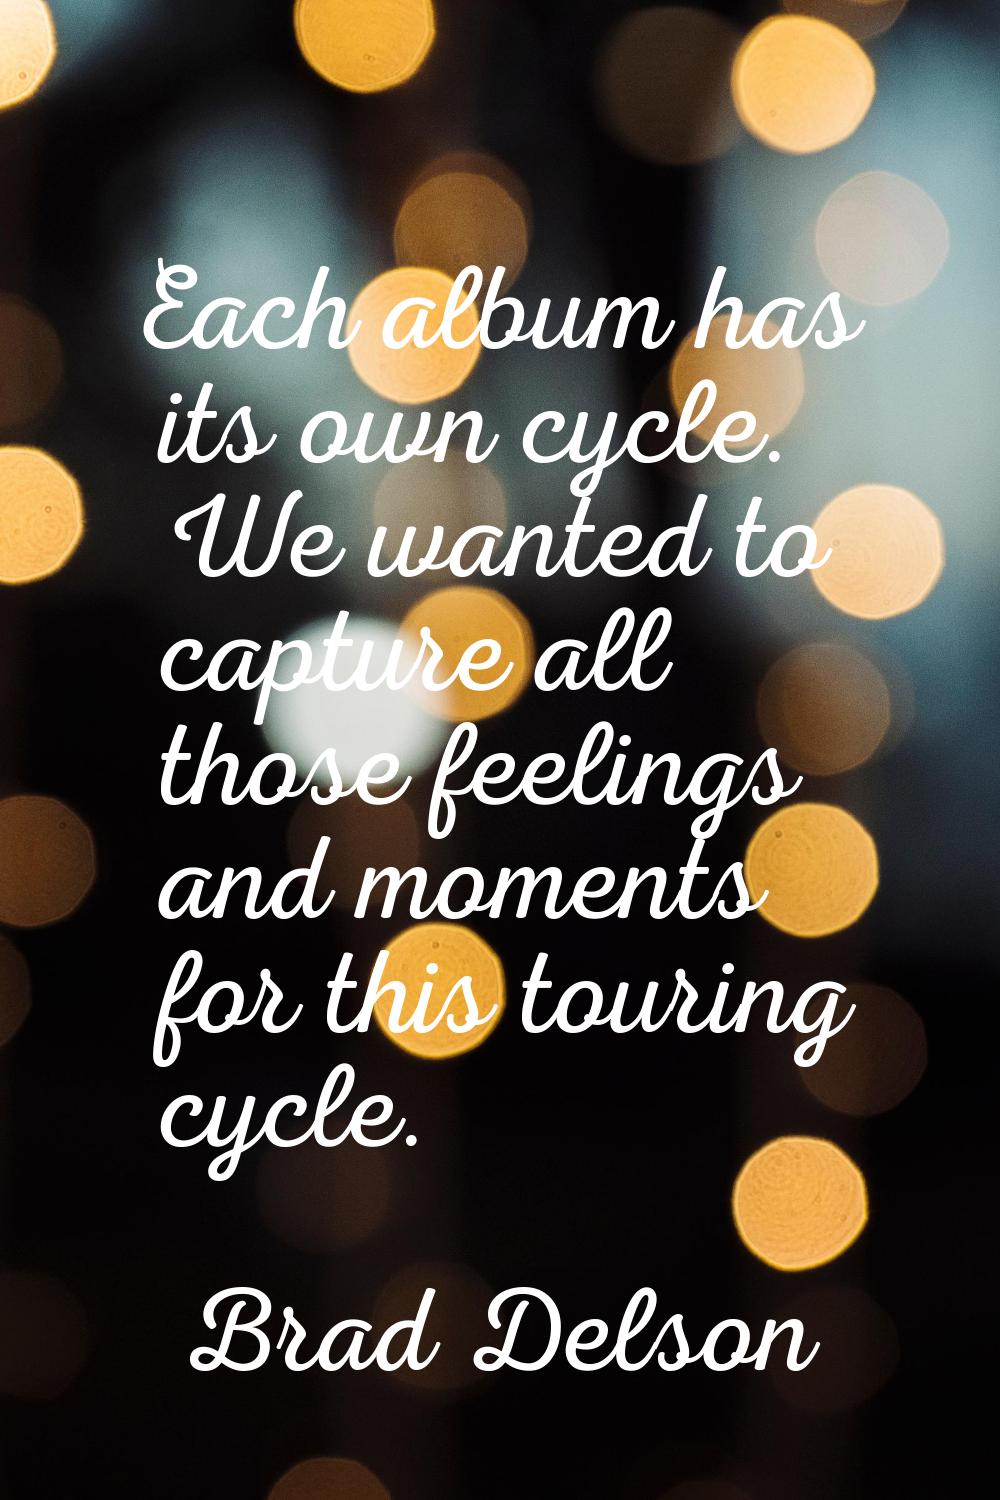 Each album has its own cycle. We wanted to capture all those feelings and moments for this touring 